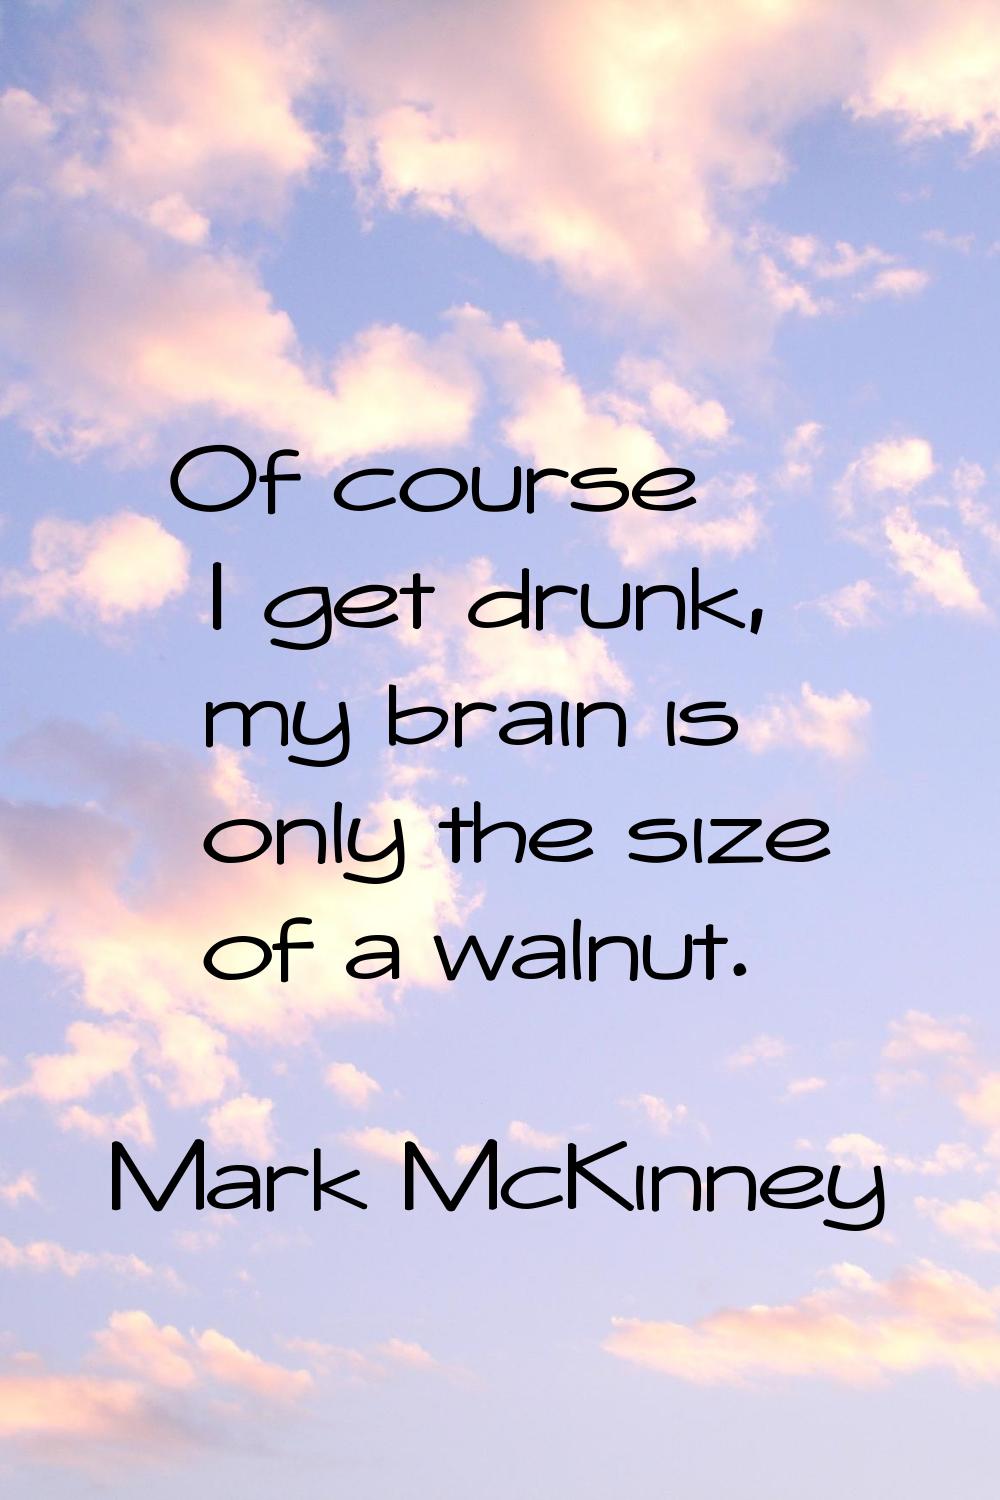 Of course I get drunk, my brain is only the size of a walnut.